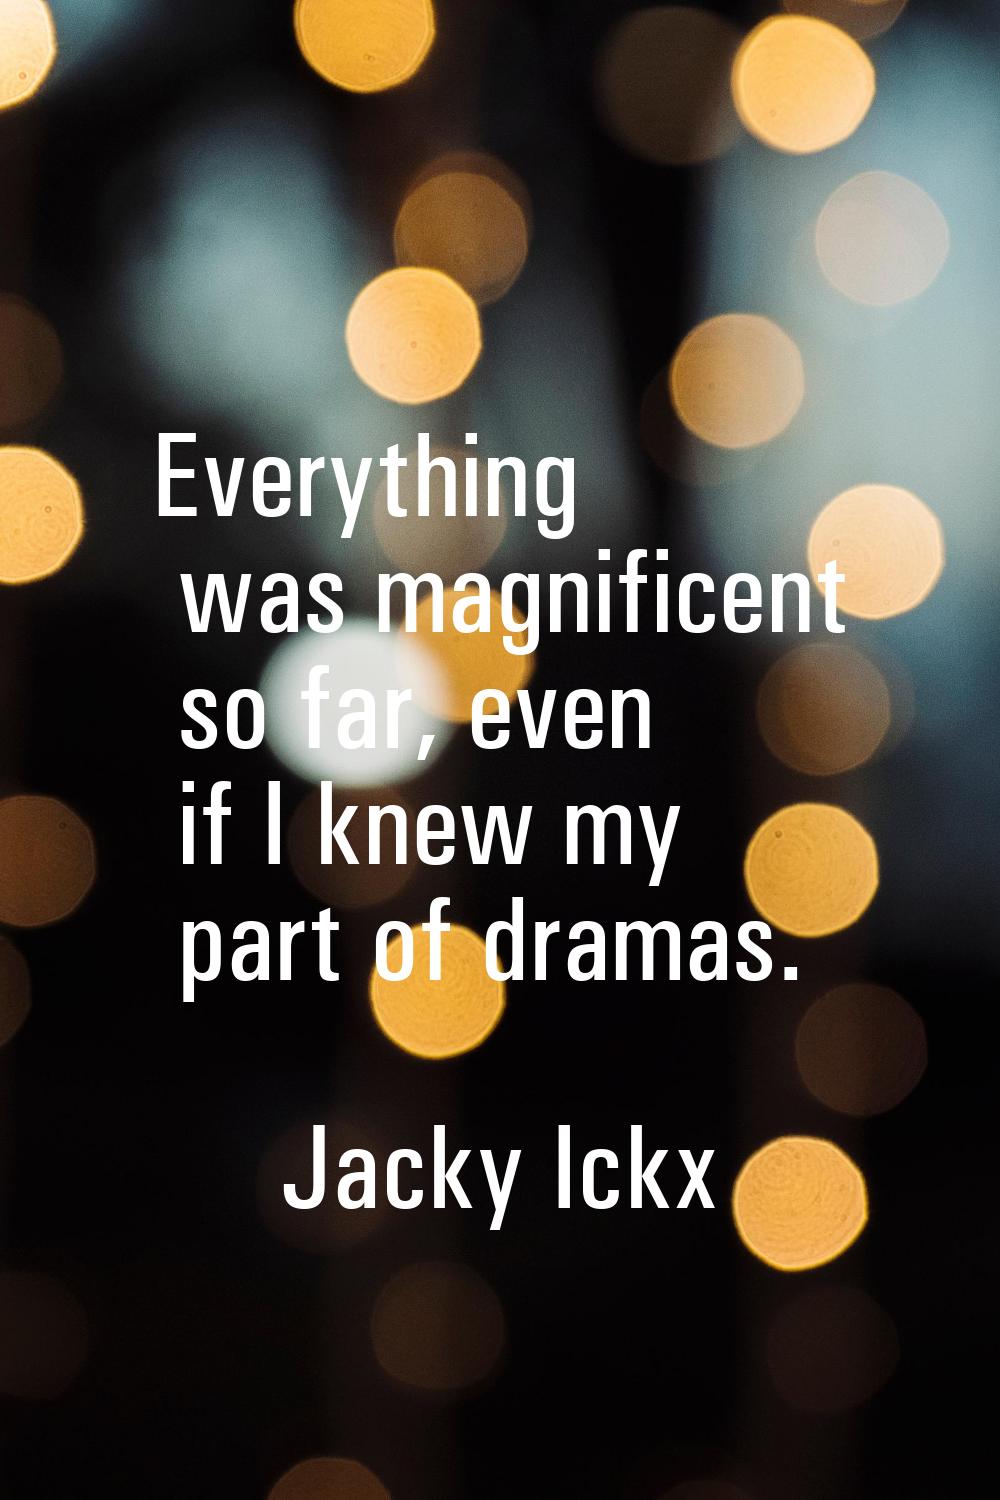 Everything was magnificent so far, even if I knew my part of dramas.